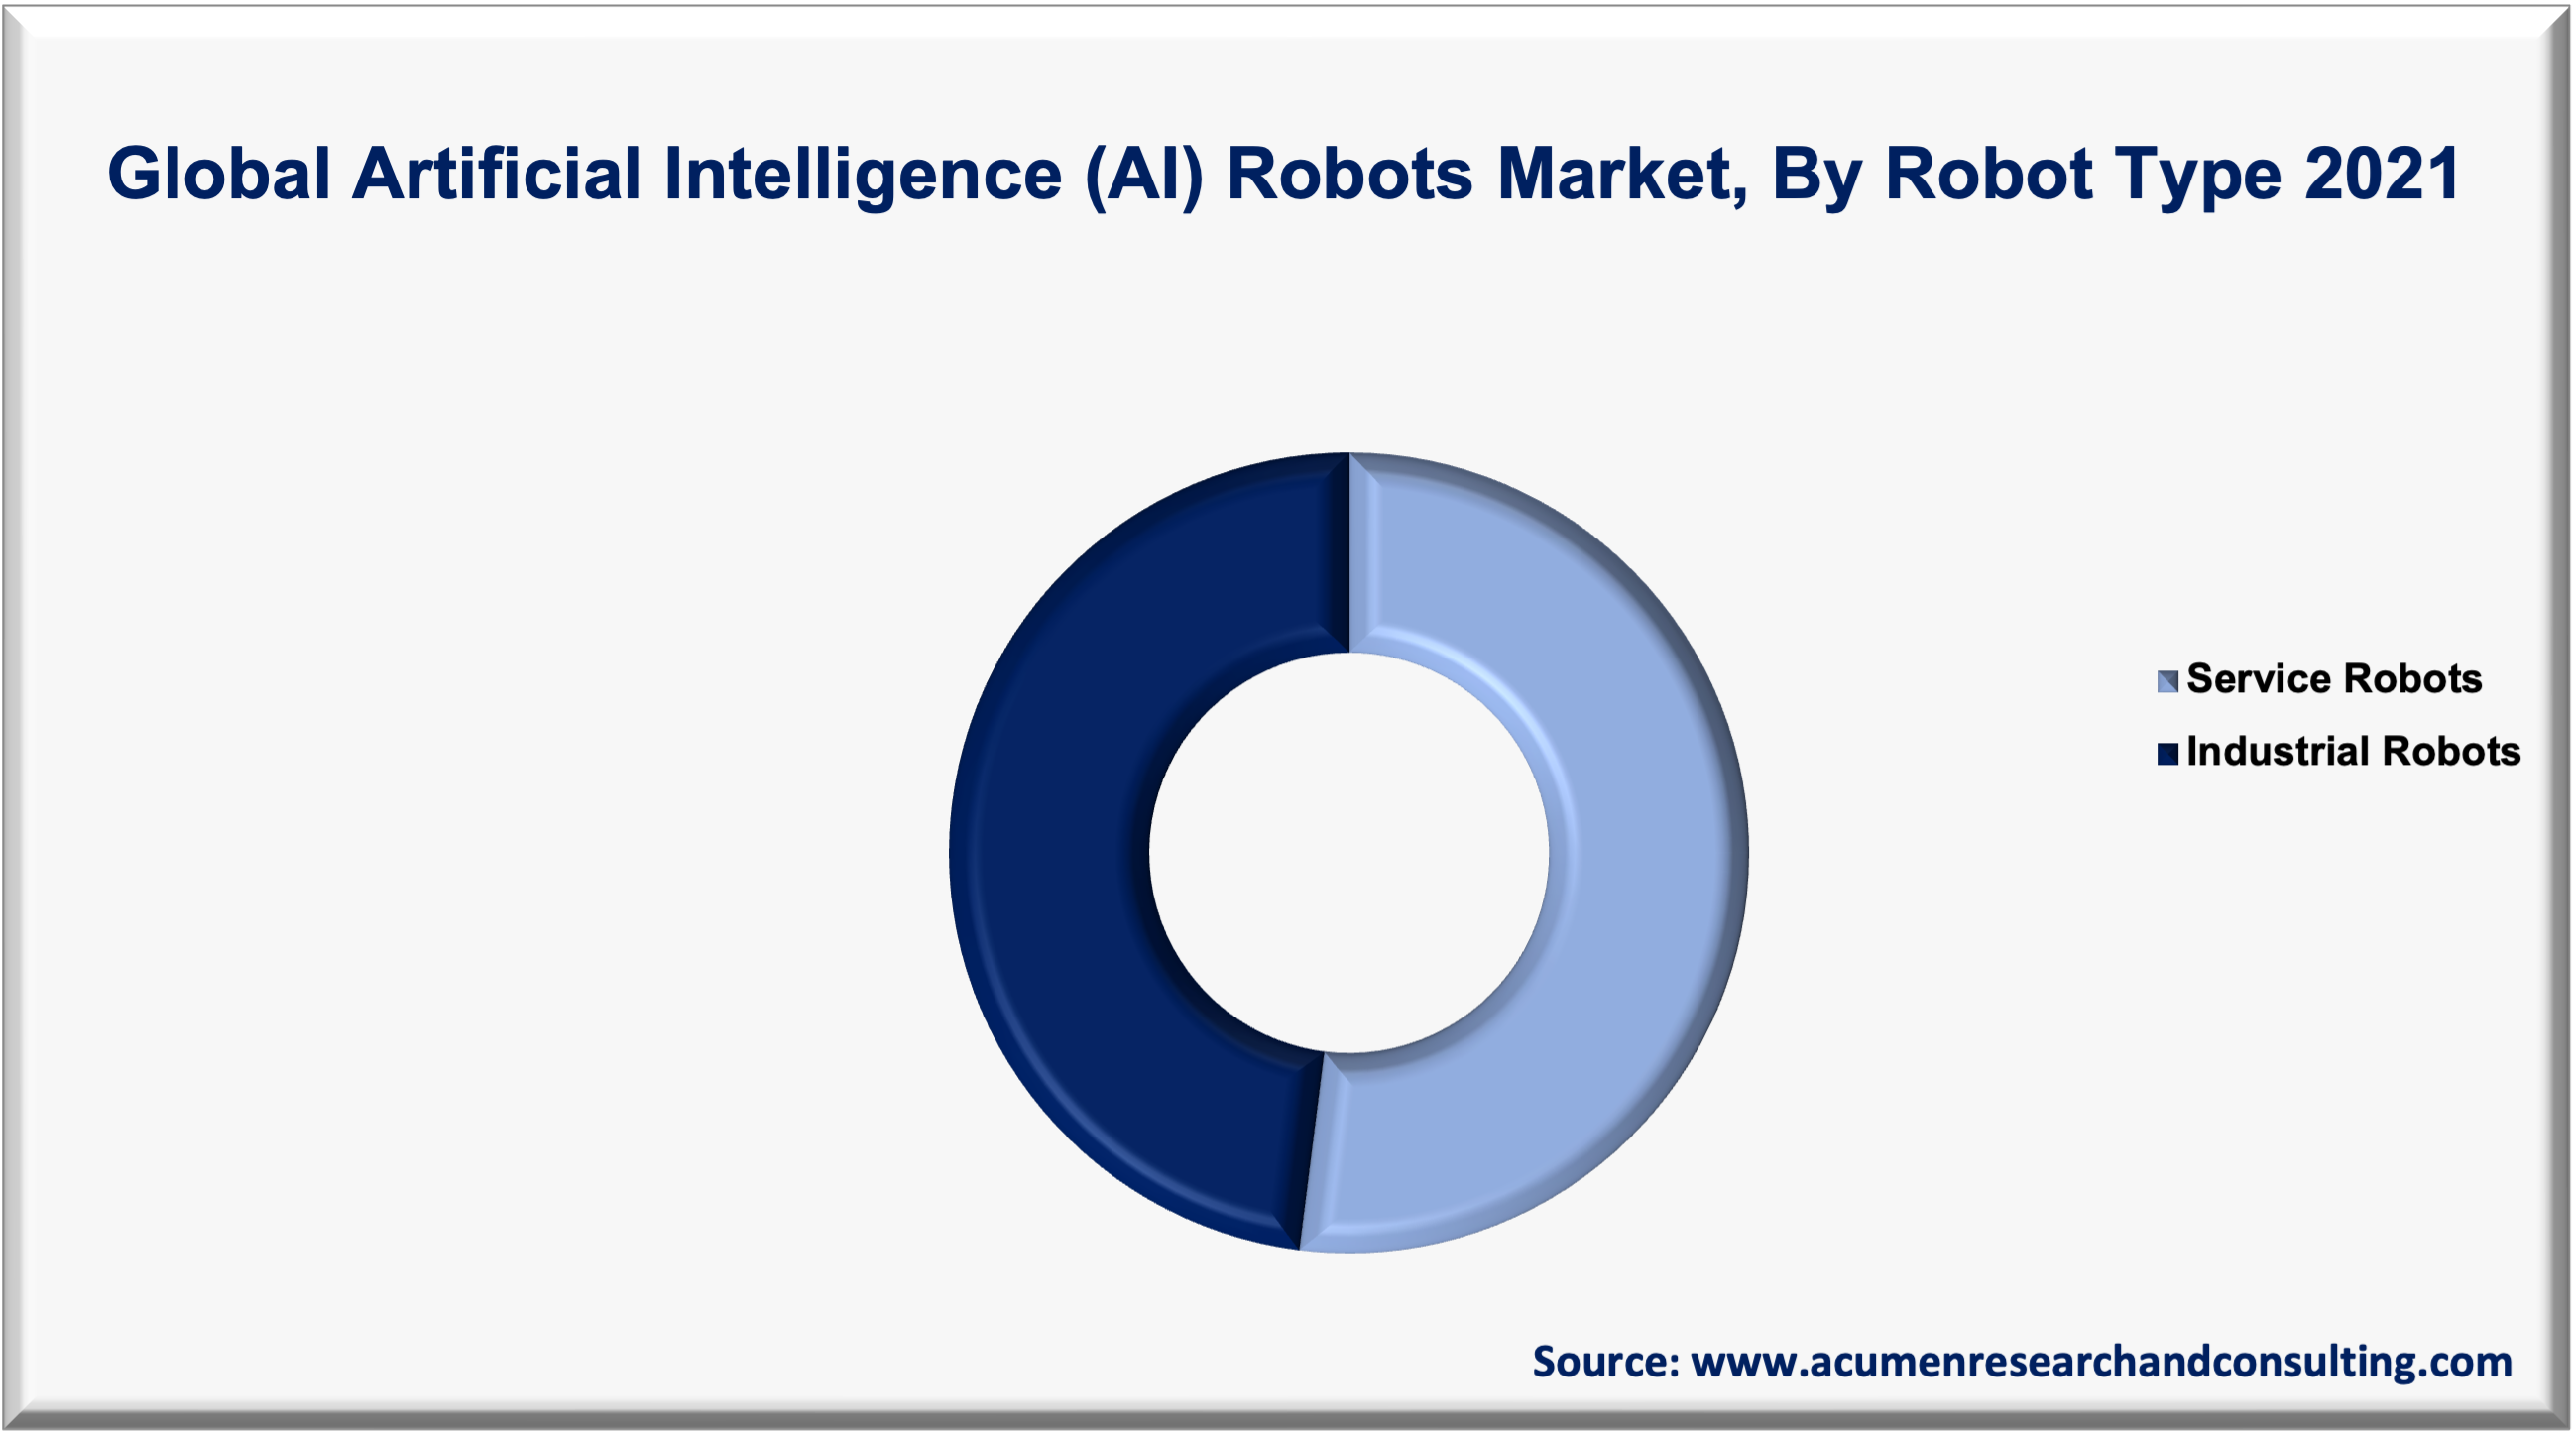 Artificial Intelligence Robots Market Share was valued at USD 6,214 Million in 2021 and is expected to reach USD 66,662 Million by 2030 growing at a CAGR of 30.5% during the forecast period from 2022 to 2030.